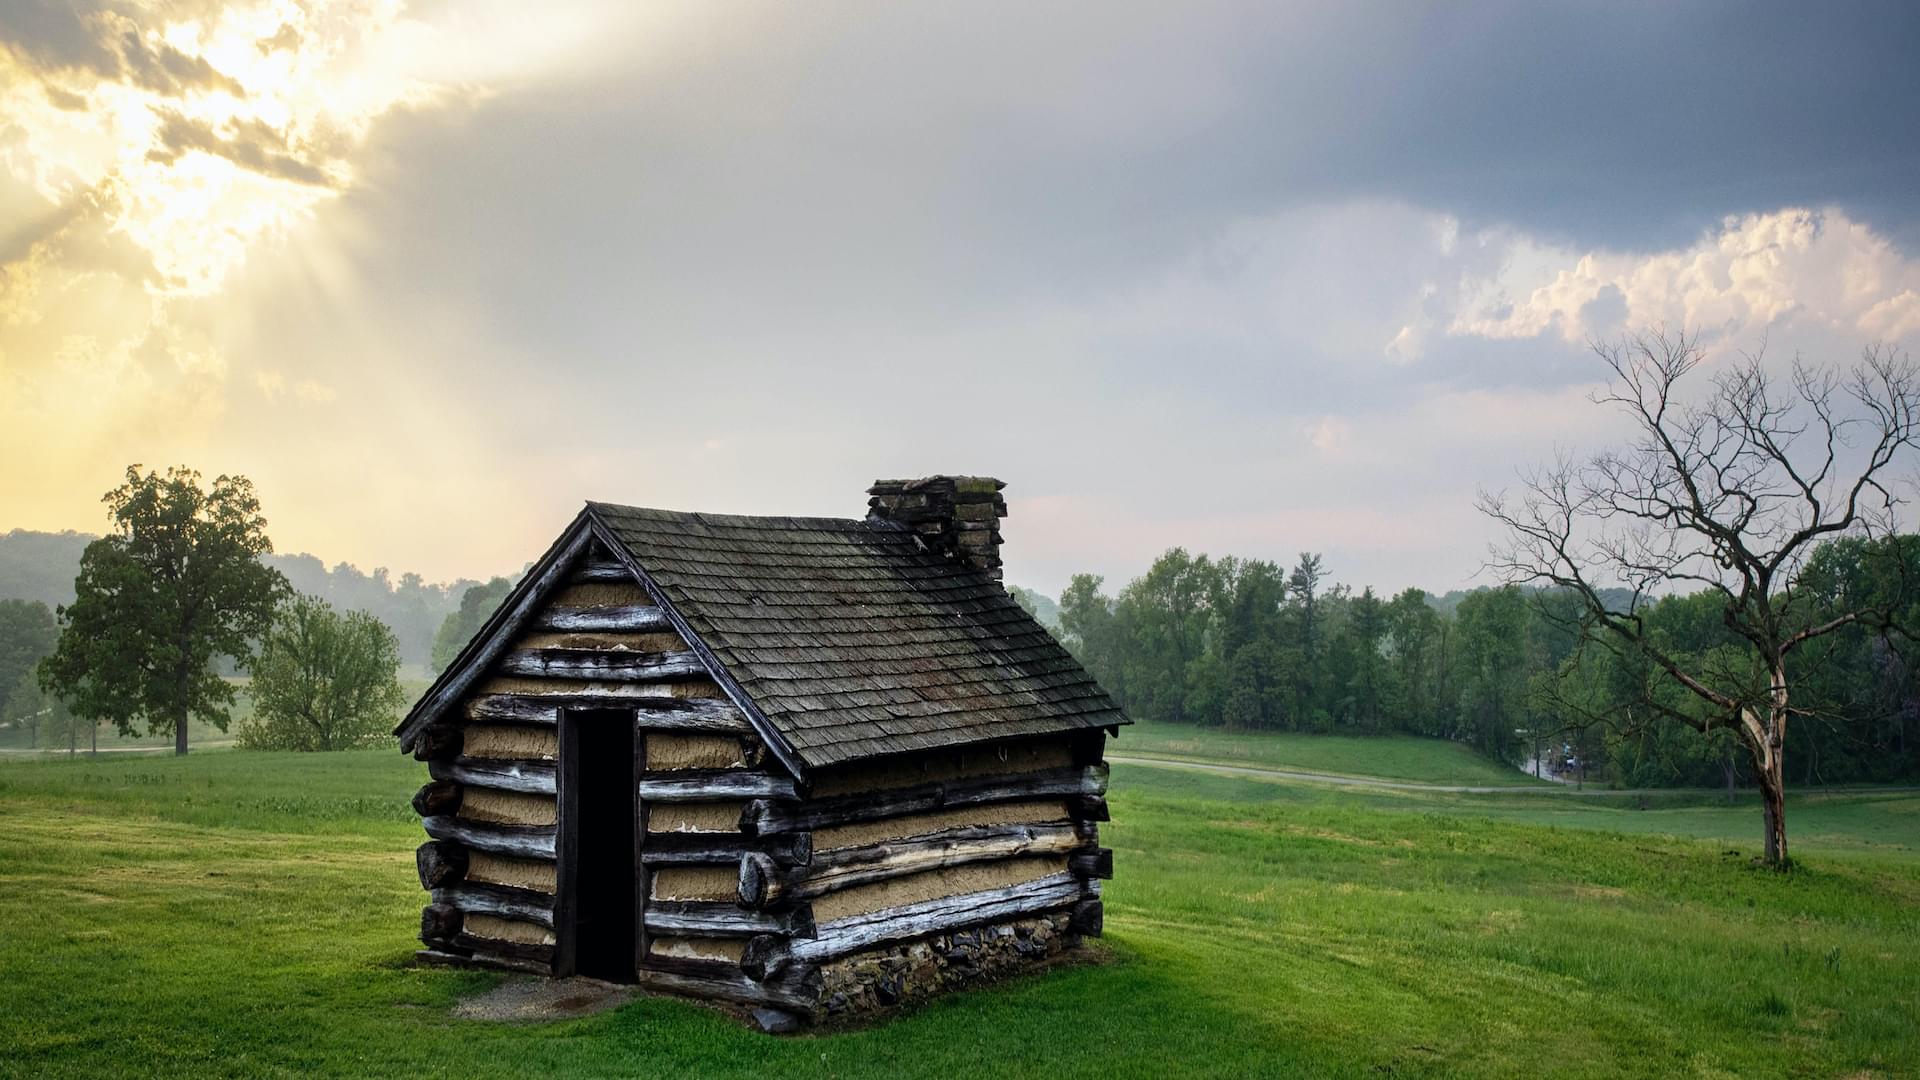 Image courtesy of Valley Forge National Park